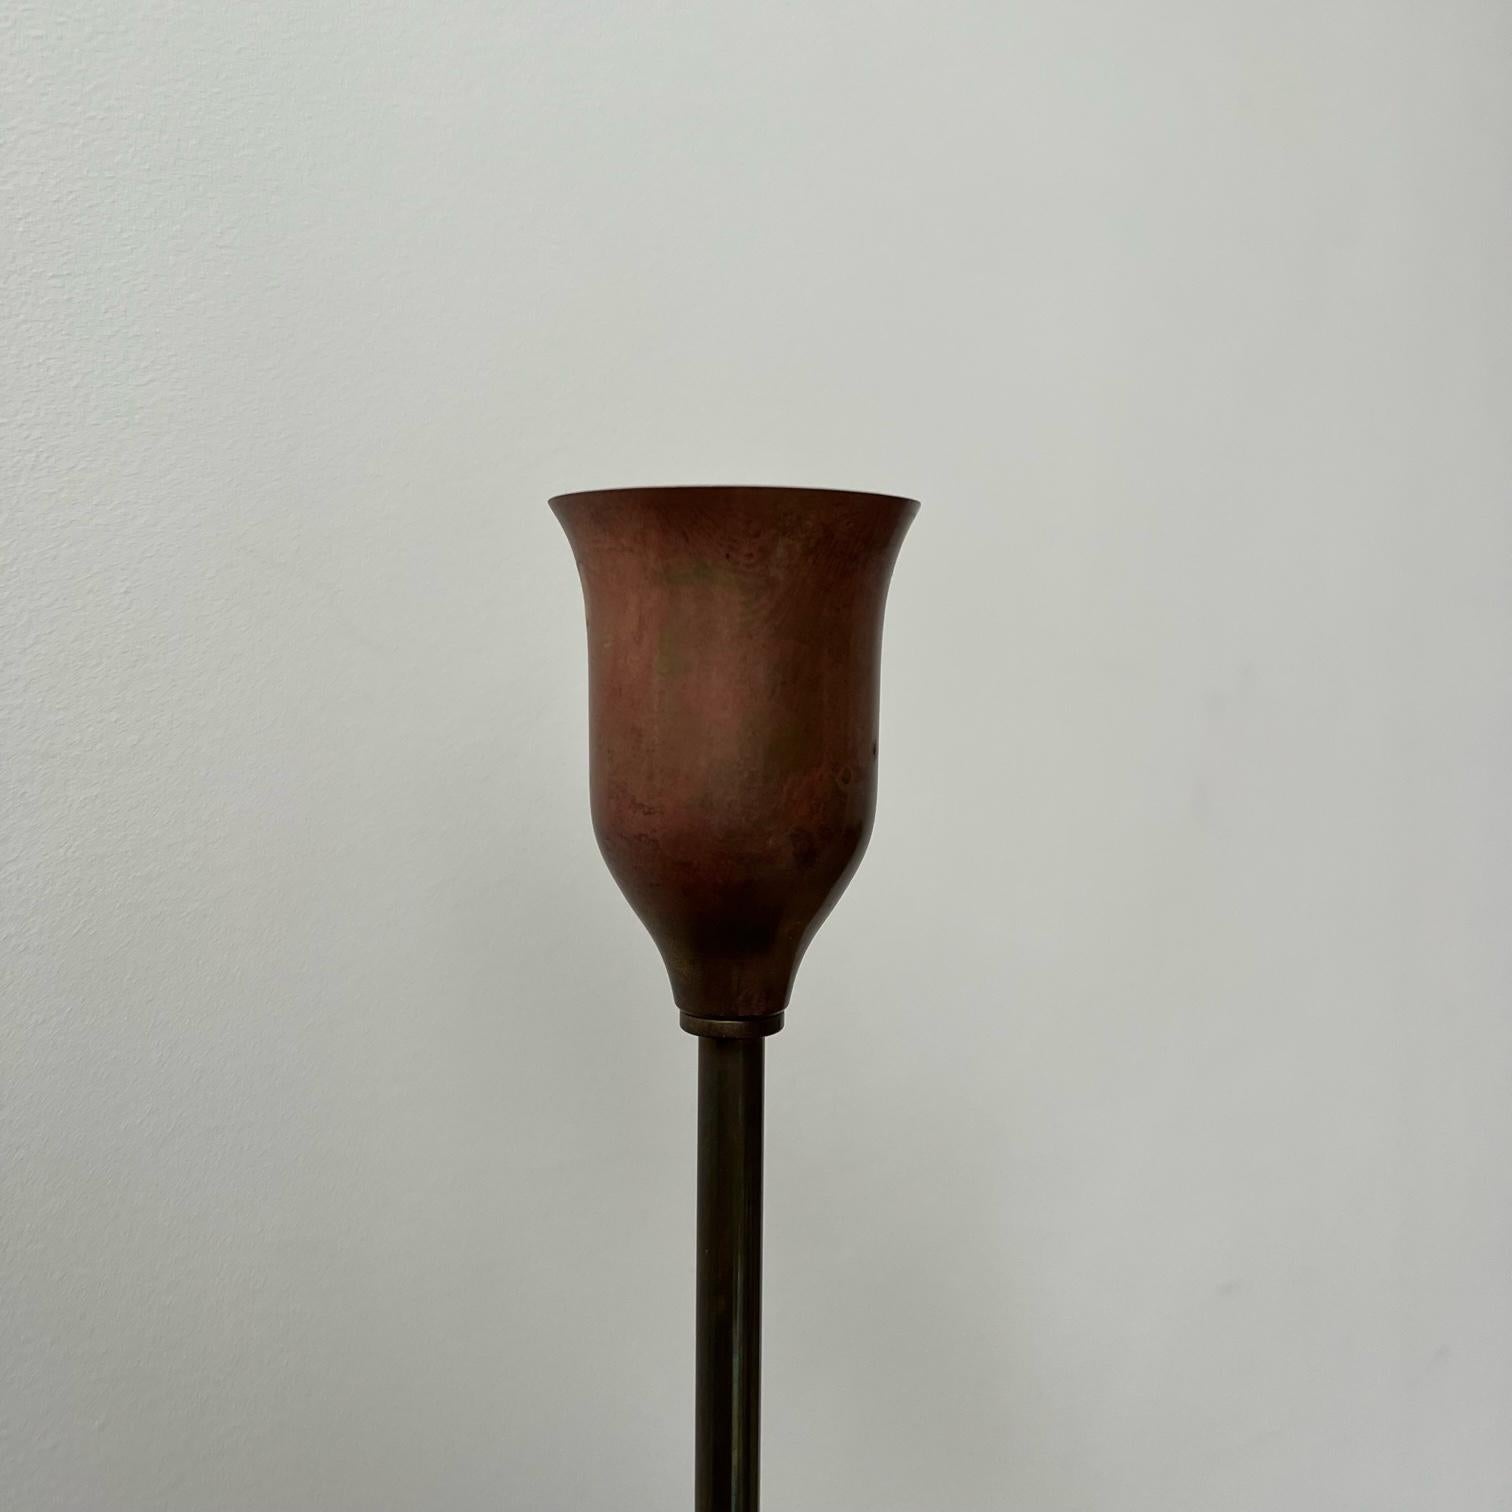 A single table lamp by Josef Frank for Firma Svenskt Tenn. 

Sweden, c1938, likely c1940s.

Naturally patinated brass, stamped to underside with the model number. 

No shade was retained but can be sourced easily to taste. 

Since re-wired